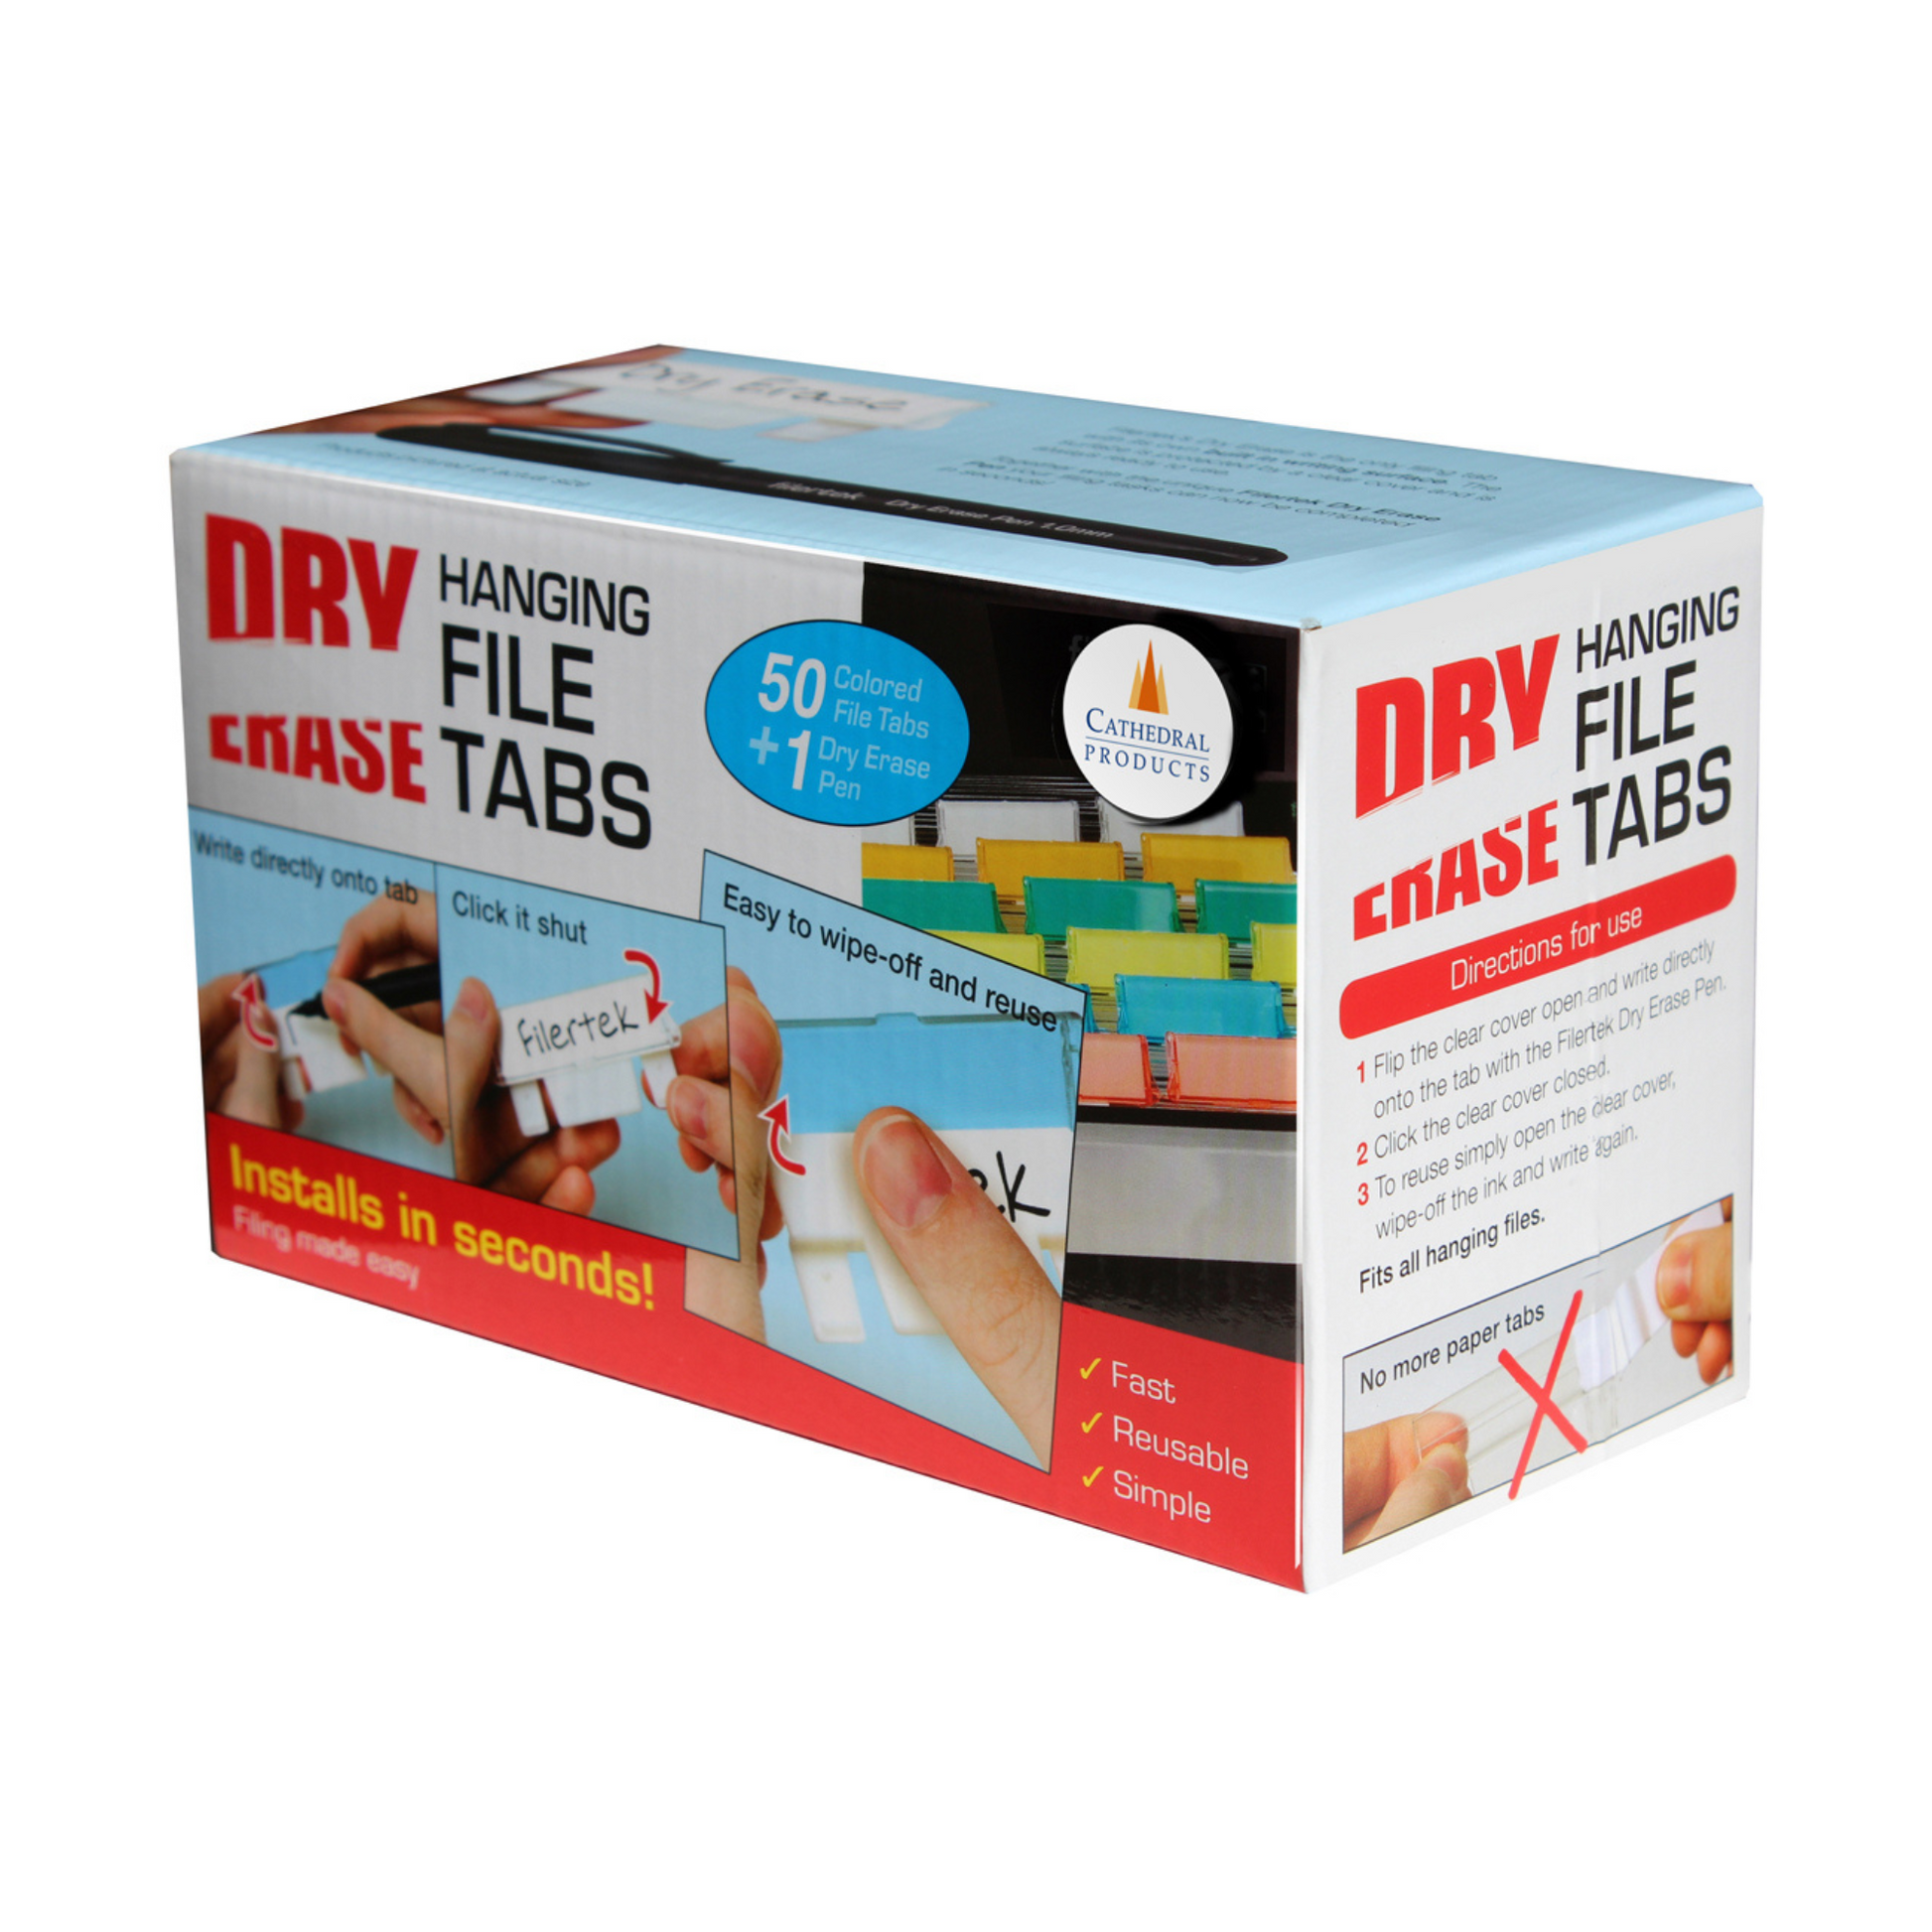 Packaging for dry erase hanging file tabs by Cathedral Products, featuring 50 coloured file tabs and one dry erase pen. The packaging emphasizes easy installation, reusability, and the inclusion flip top covers, with instructions showing how to write directly onto tabs and erase for reuse.